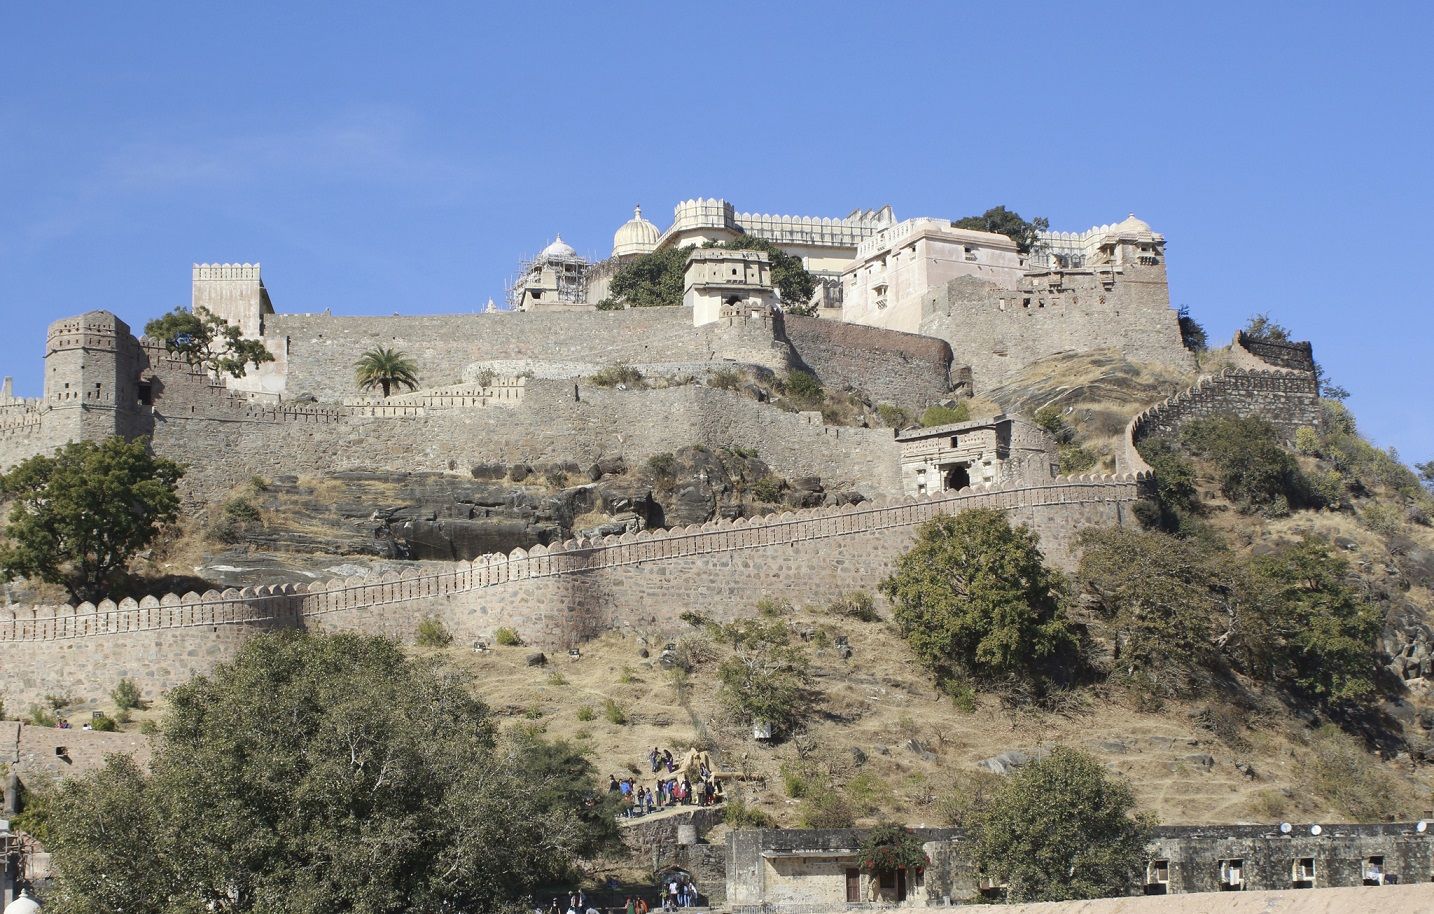 Kumbhalgarh - Second Largest wall in the world